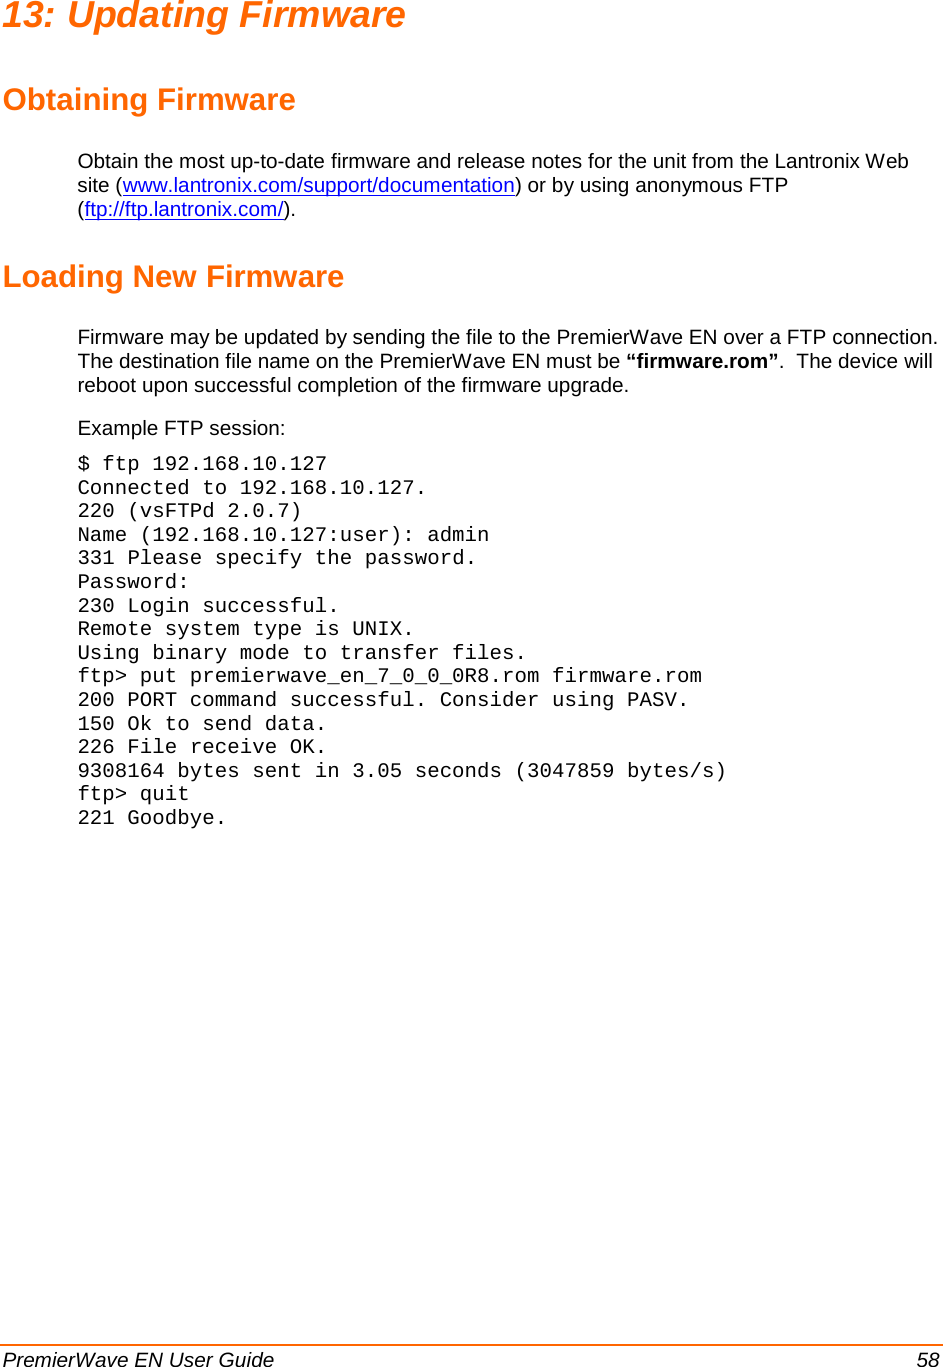   PremierWave EN User Guide    58 13: Updating Firmware Obtaining Firmware Obtain the most up-to-date firmware and release notes for the unit from the Lantronix Web site (www.lantronix.com/support/documentation) or by using anonymous FTP (ftp://ftp.lantronix.com/). Loading New Firmware Firmware may be updated by sending the file to the PremierWave EN over a FTP connection.  The destination file name on the PremierWave EN must be “firmware.rom”.  The device will reboot upon successful completion of the firmware upgrade. Example FTP session: $ ftp 192.168.10.127 Connected to 192.168.10.127. 220 (vsFTPd 2.0.7) Name (192.168.10.127:user): admin 331 Please specify the password. Password: 230 Login successful. Remote system type is UNIX. Using binary mode to transfer files. ftp&gt; put premierwave_en_7_0_0_0R8.rom firmware.rom 200 PORT command successful. Consider using PASV. 150 Ok to send data. 226 File receive OK. 9308164 bytes sent in 3.05 seconds (3047859 bytes/s) ftp&gt; quit 221 Goodbye.  